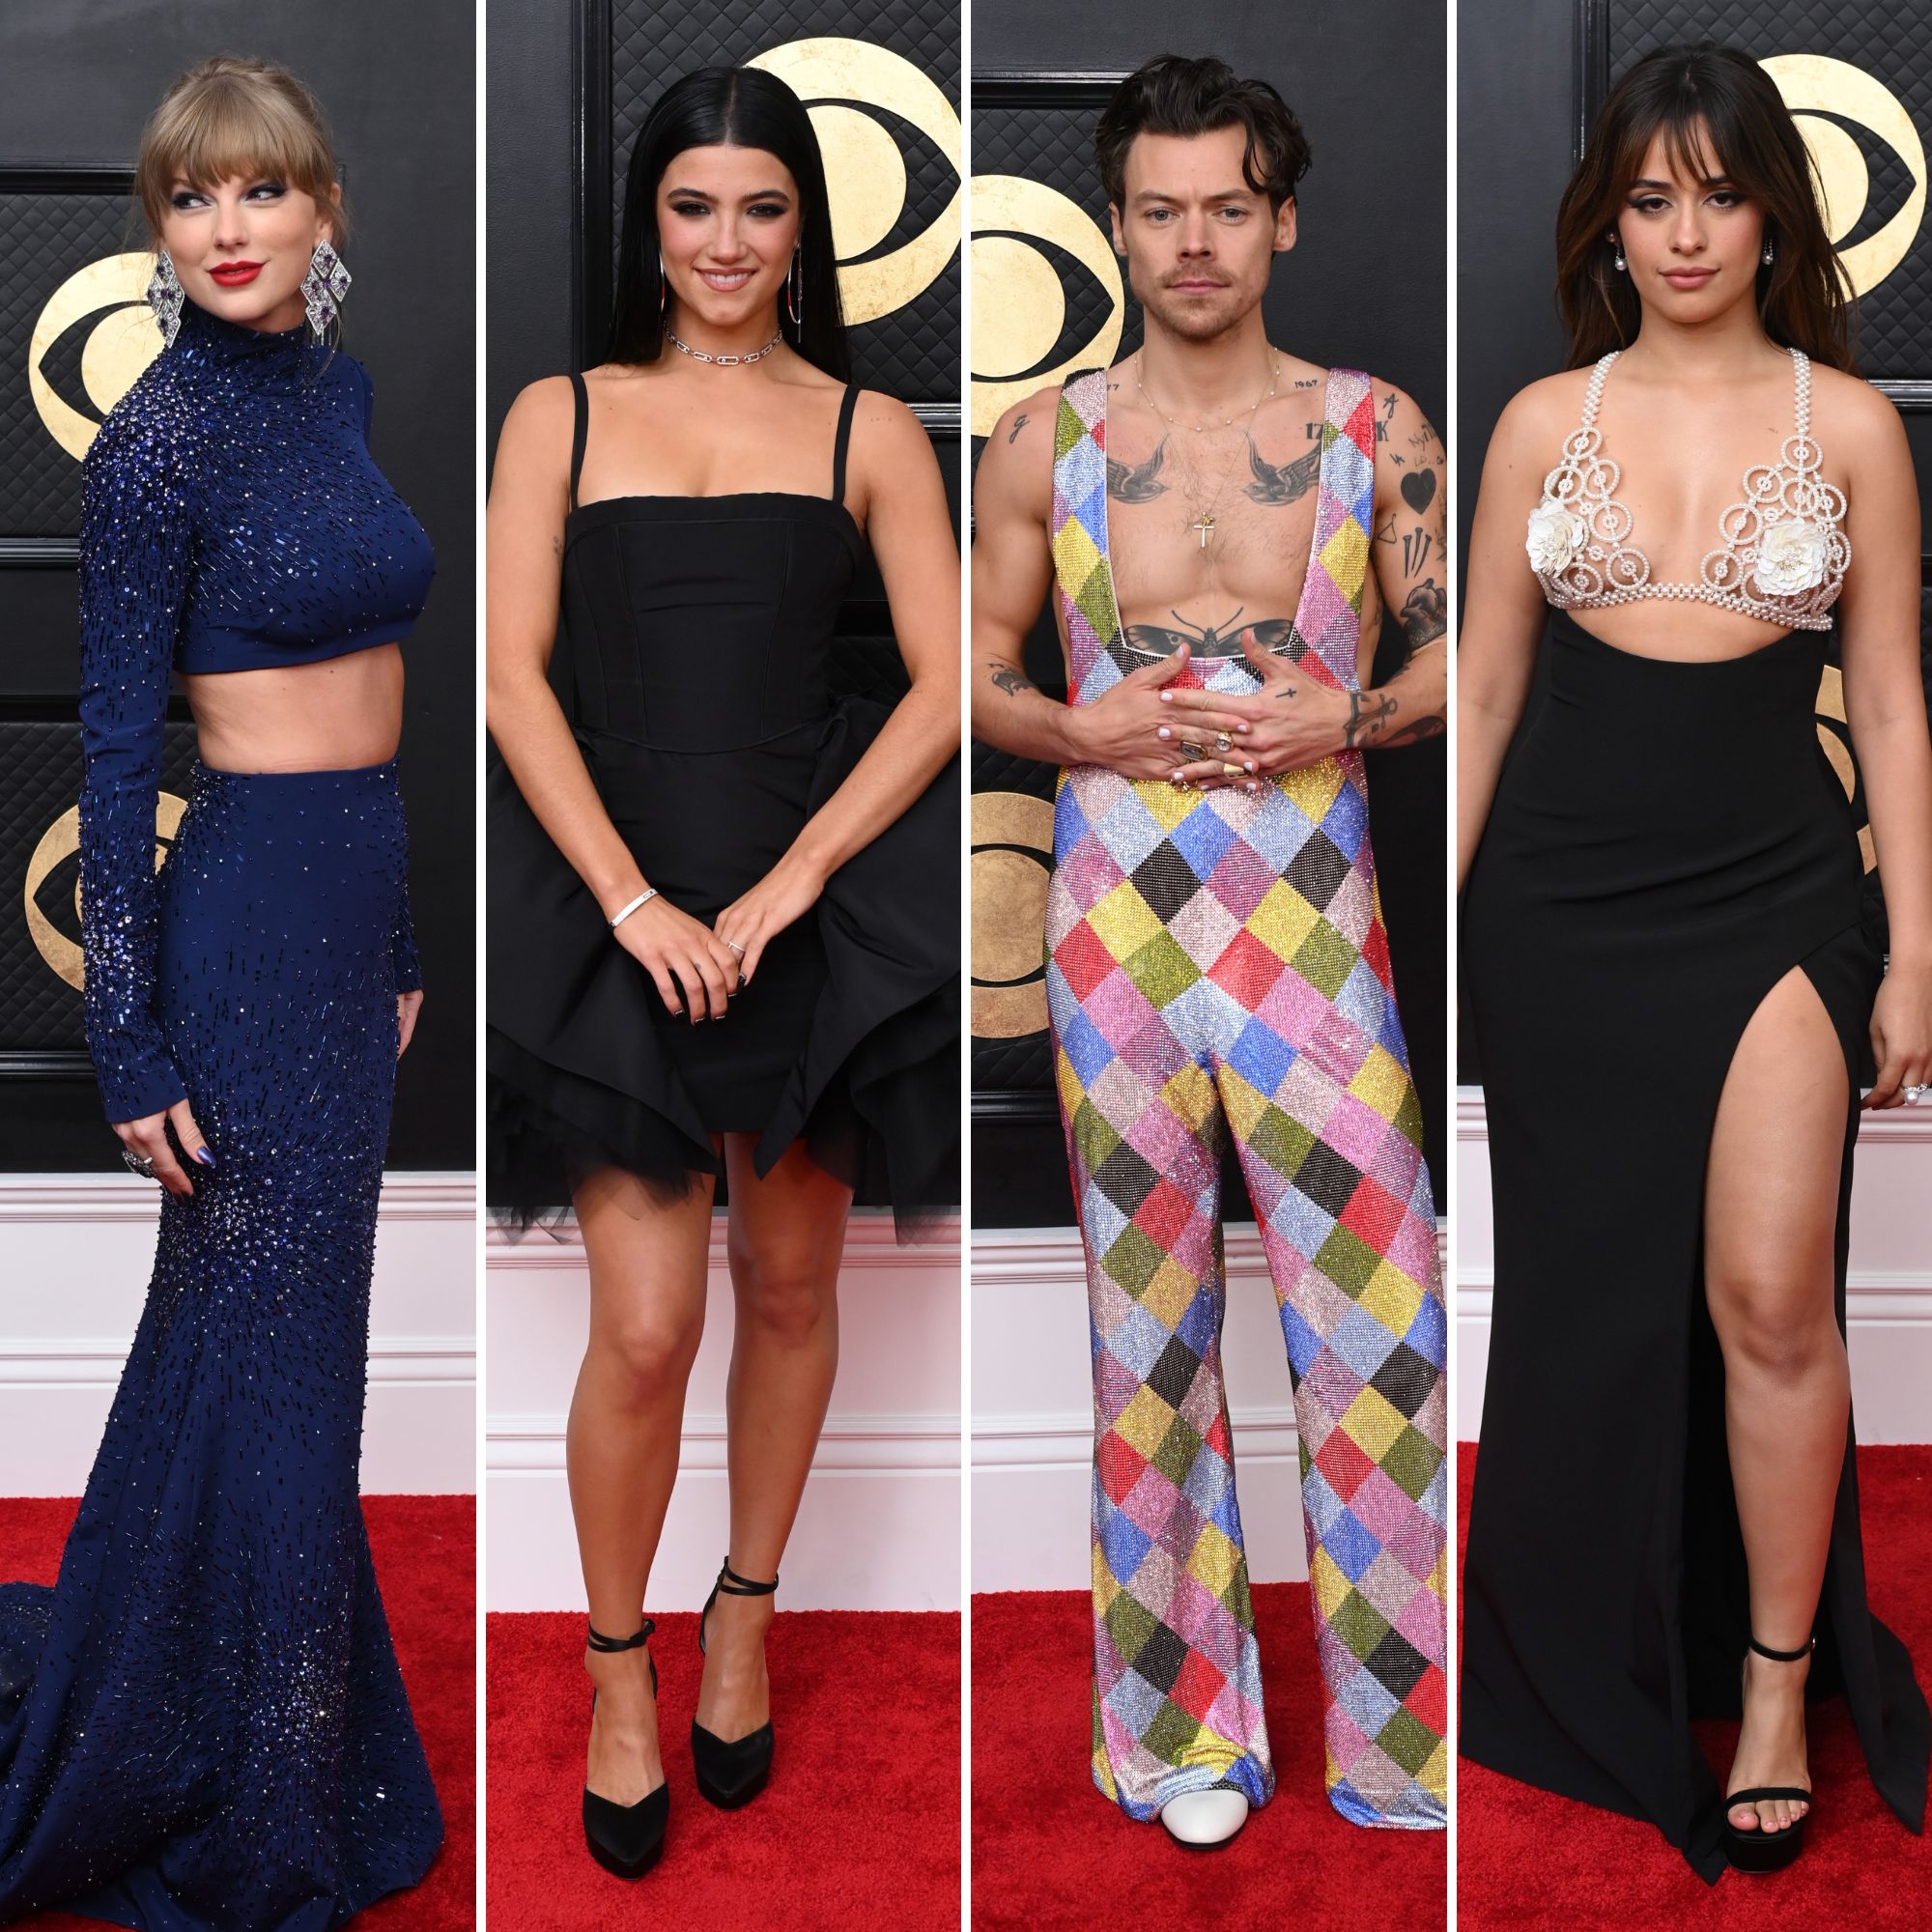 The Grammys 2023 Red Carpet: The Best Looks